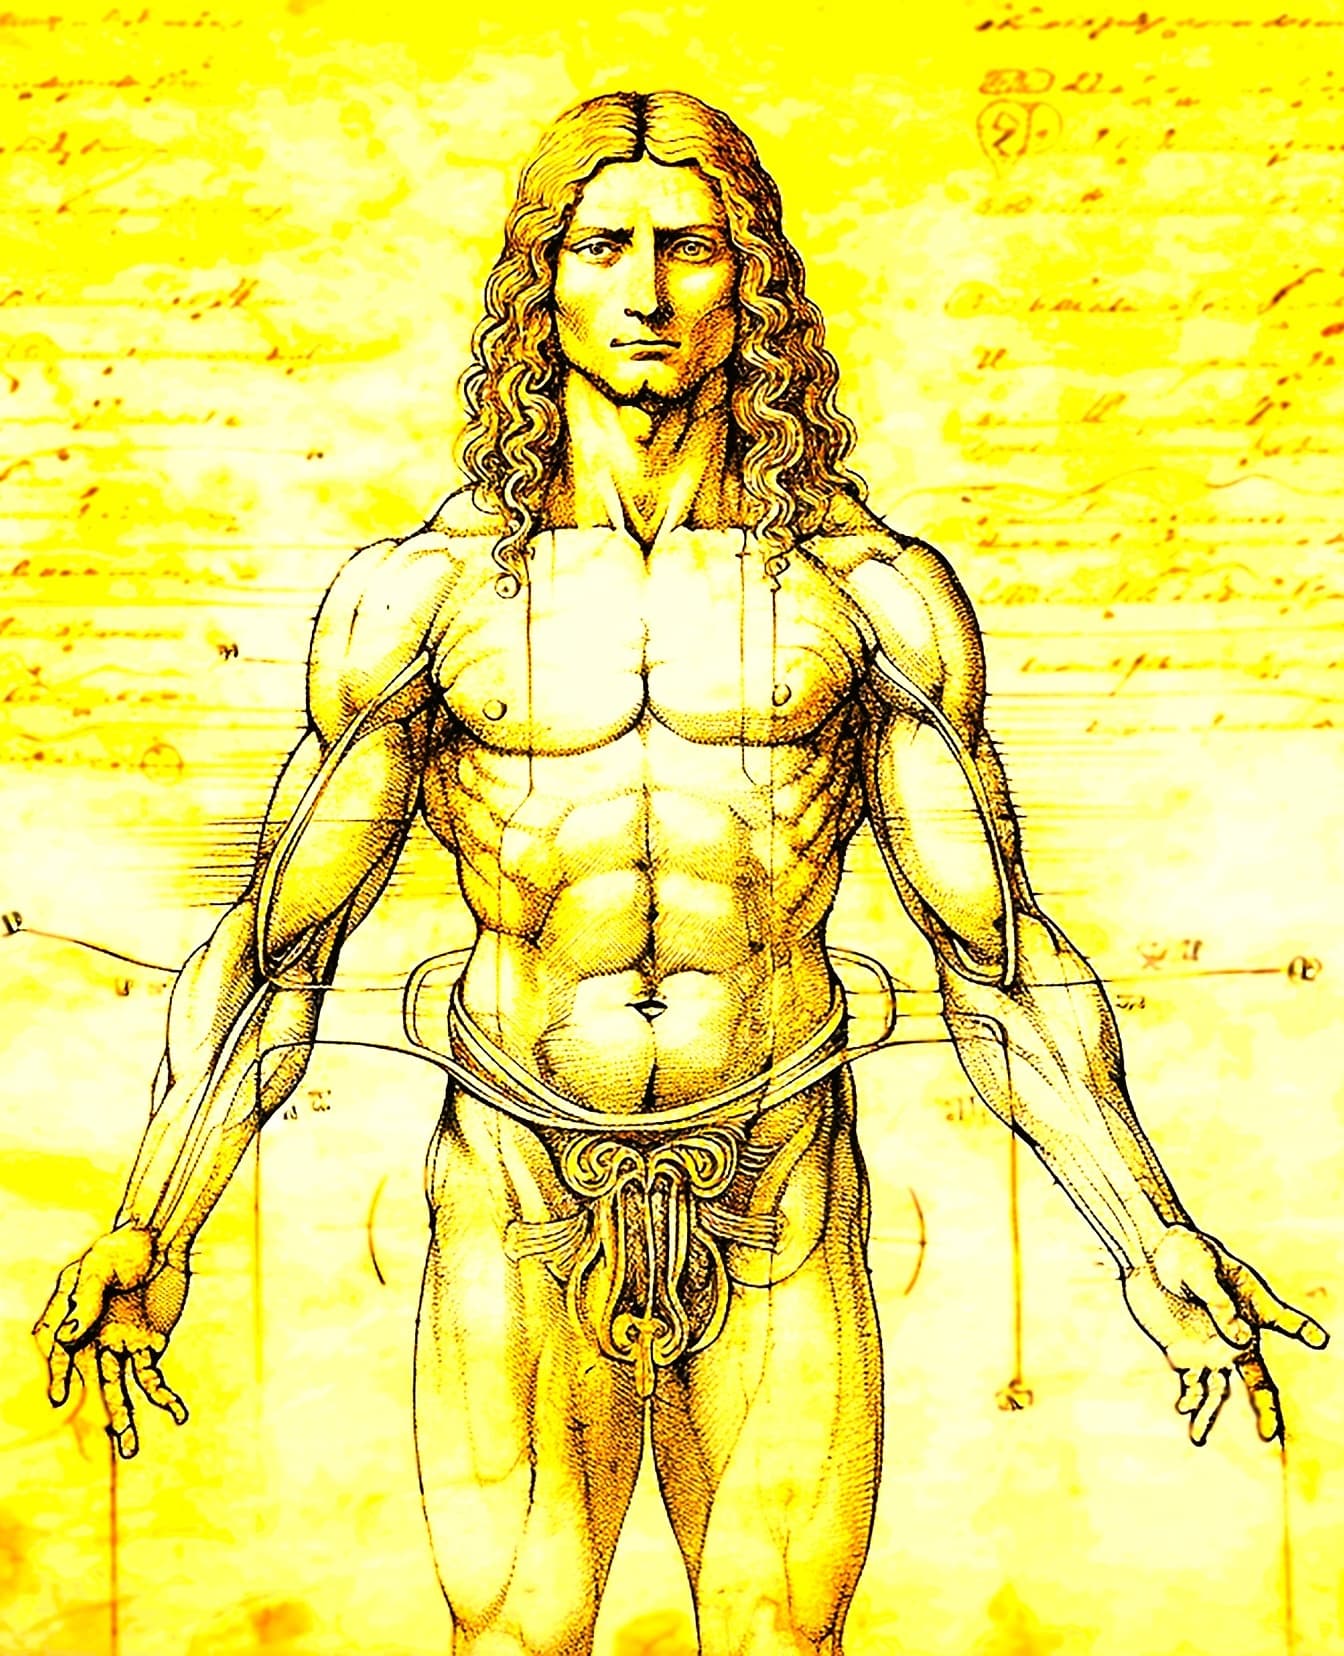 Drawing of the anatomy of a muscular man, in a style of the Vitruvian Man by Leonardo da Vinci